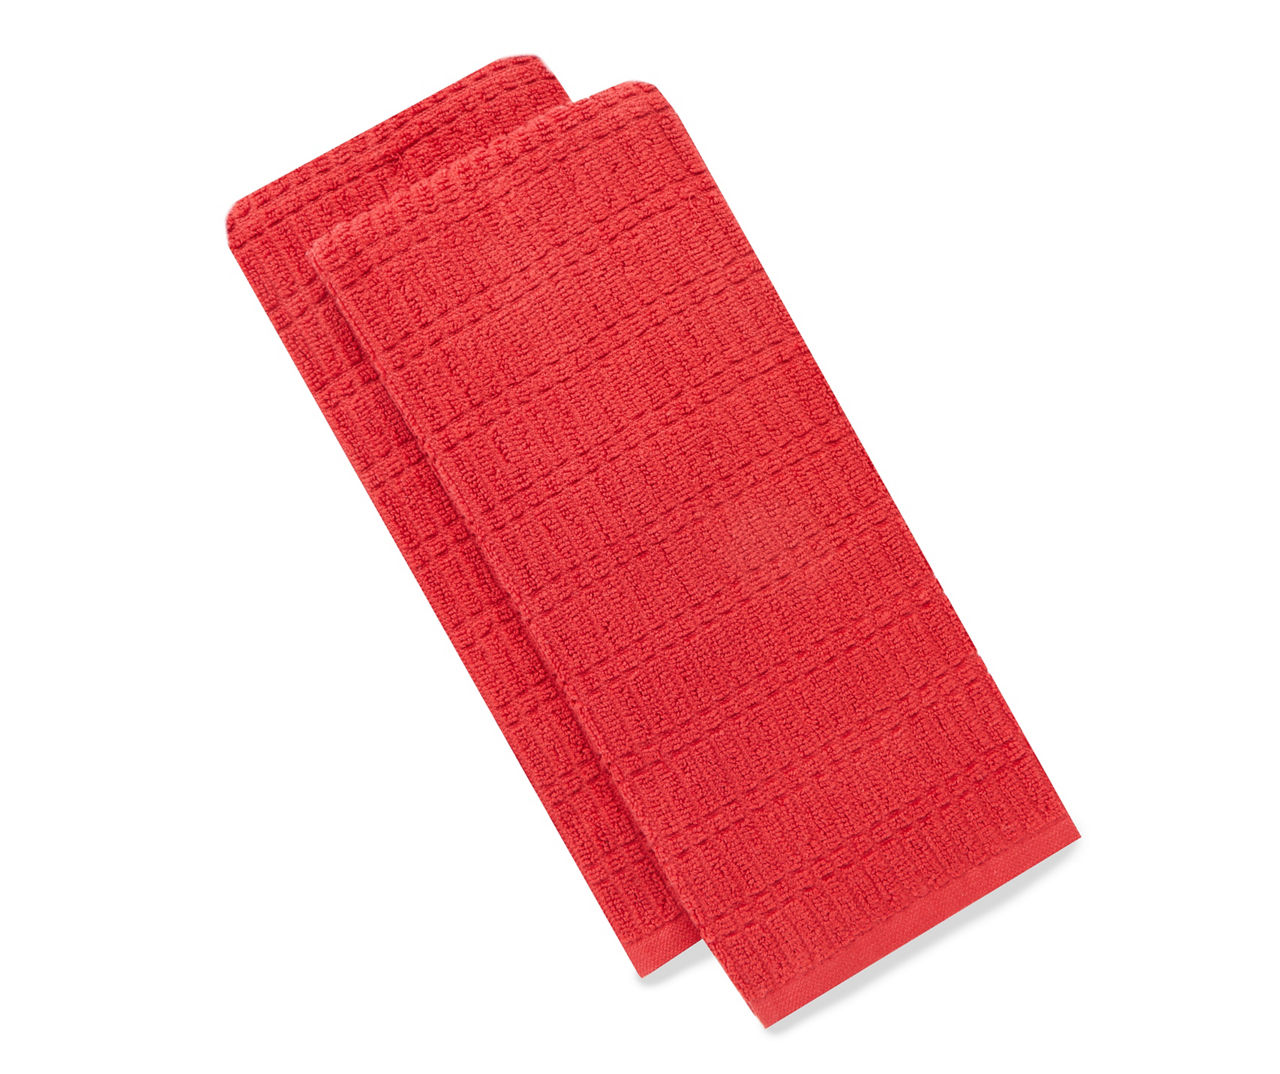 Master Cuisine Red & Plaid Kitchen Towels, 3-Pack